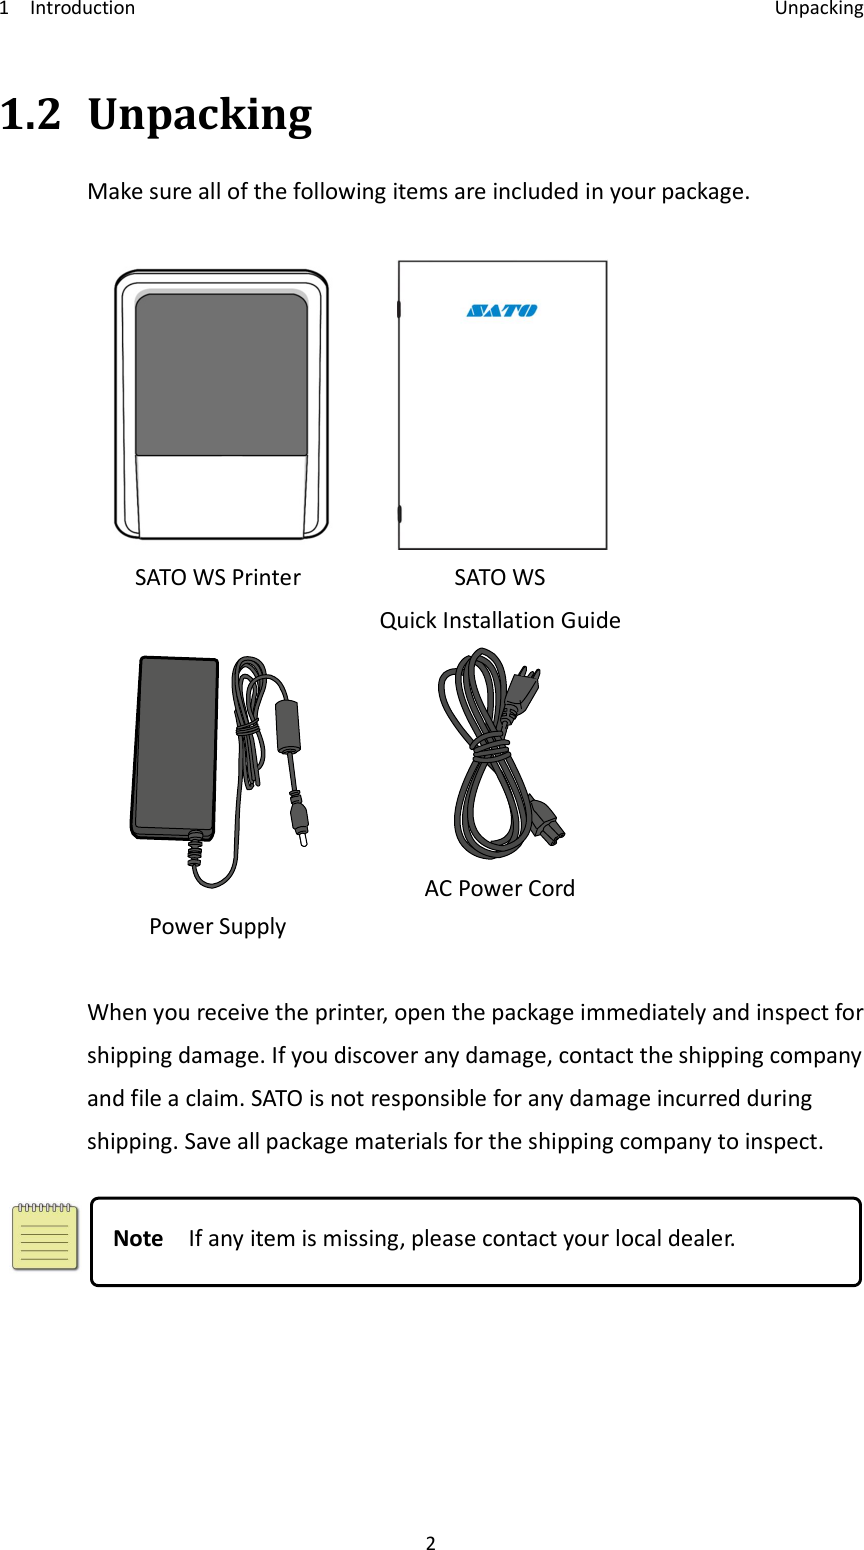 1    Introduction    Unpacking 2 1.2 Unpacking Make sure all of the following items are included in your package.   SATO WS Printer  SATO WS Quick Installation Guide  Power Supply  AC Power Cord  When you receive the printer, open the package immediately and inspect for shipping damage. If you discover any damage, contact the shipping company and file a claim. SATO is not responsible for any damage incurred during shipping. Save all package materials for the shipping company to inspect.   Note    If any item is missing, please contact your local dealer. 